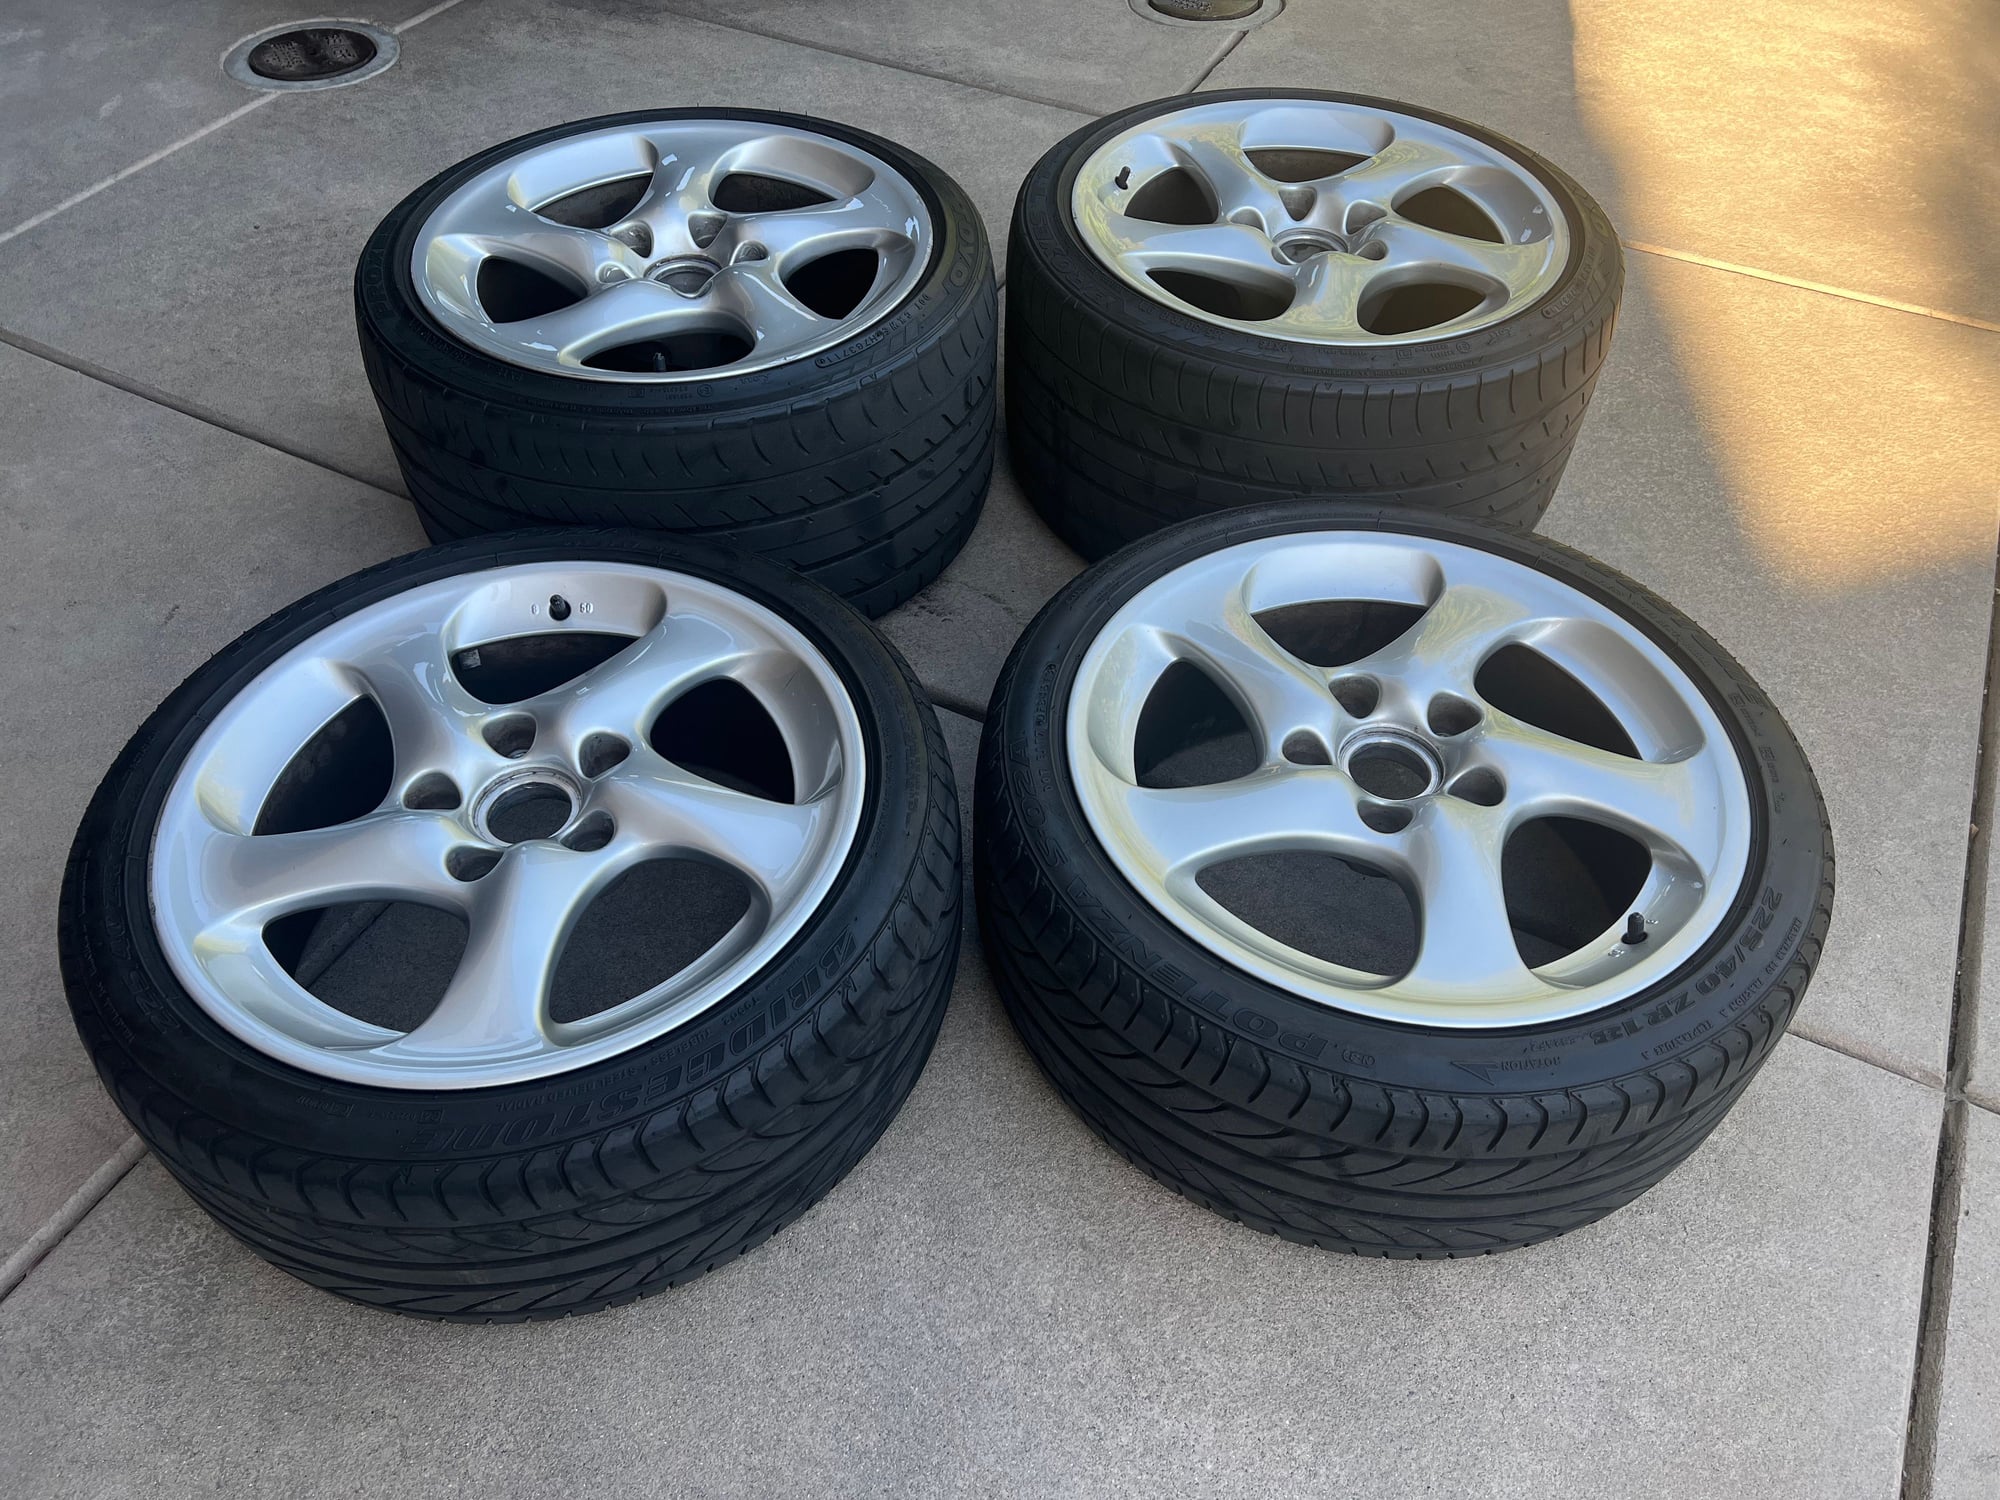 Wheels and Tires/Axles - FS: Porsche 996 Solid Turbo Twist Wheels and Tires - Used - All Years Porsche 911 - Brea, CA 92821, United States